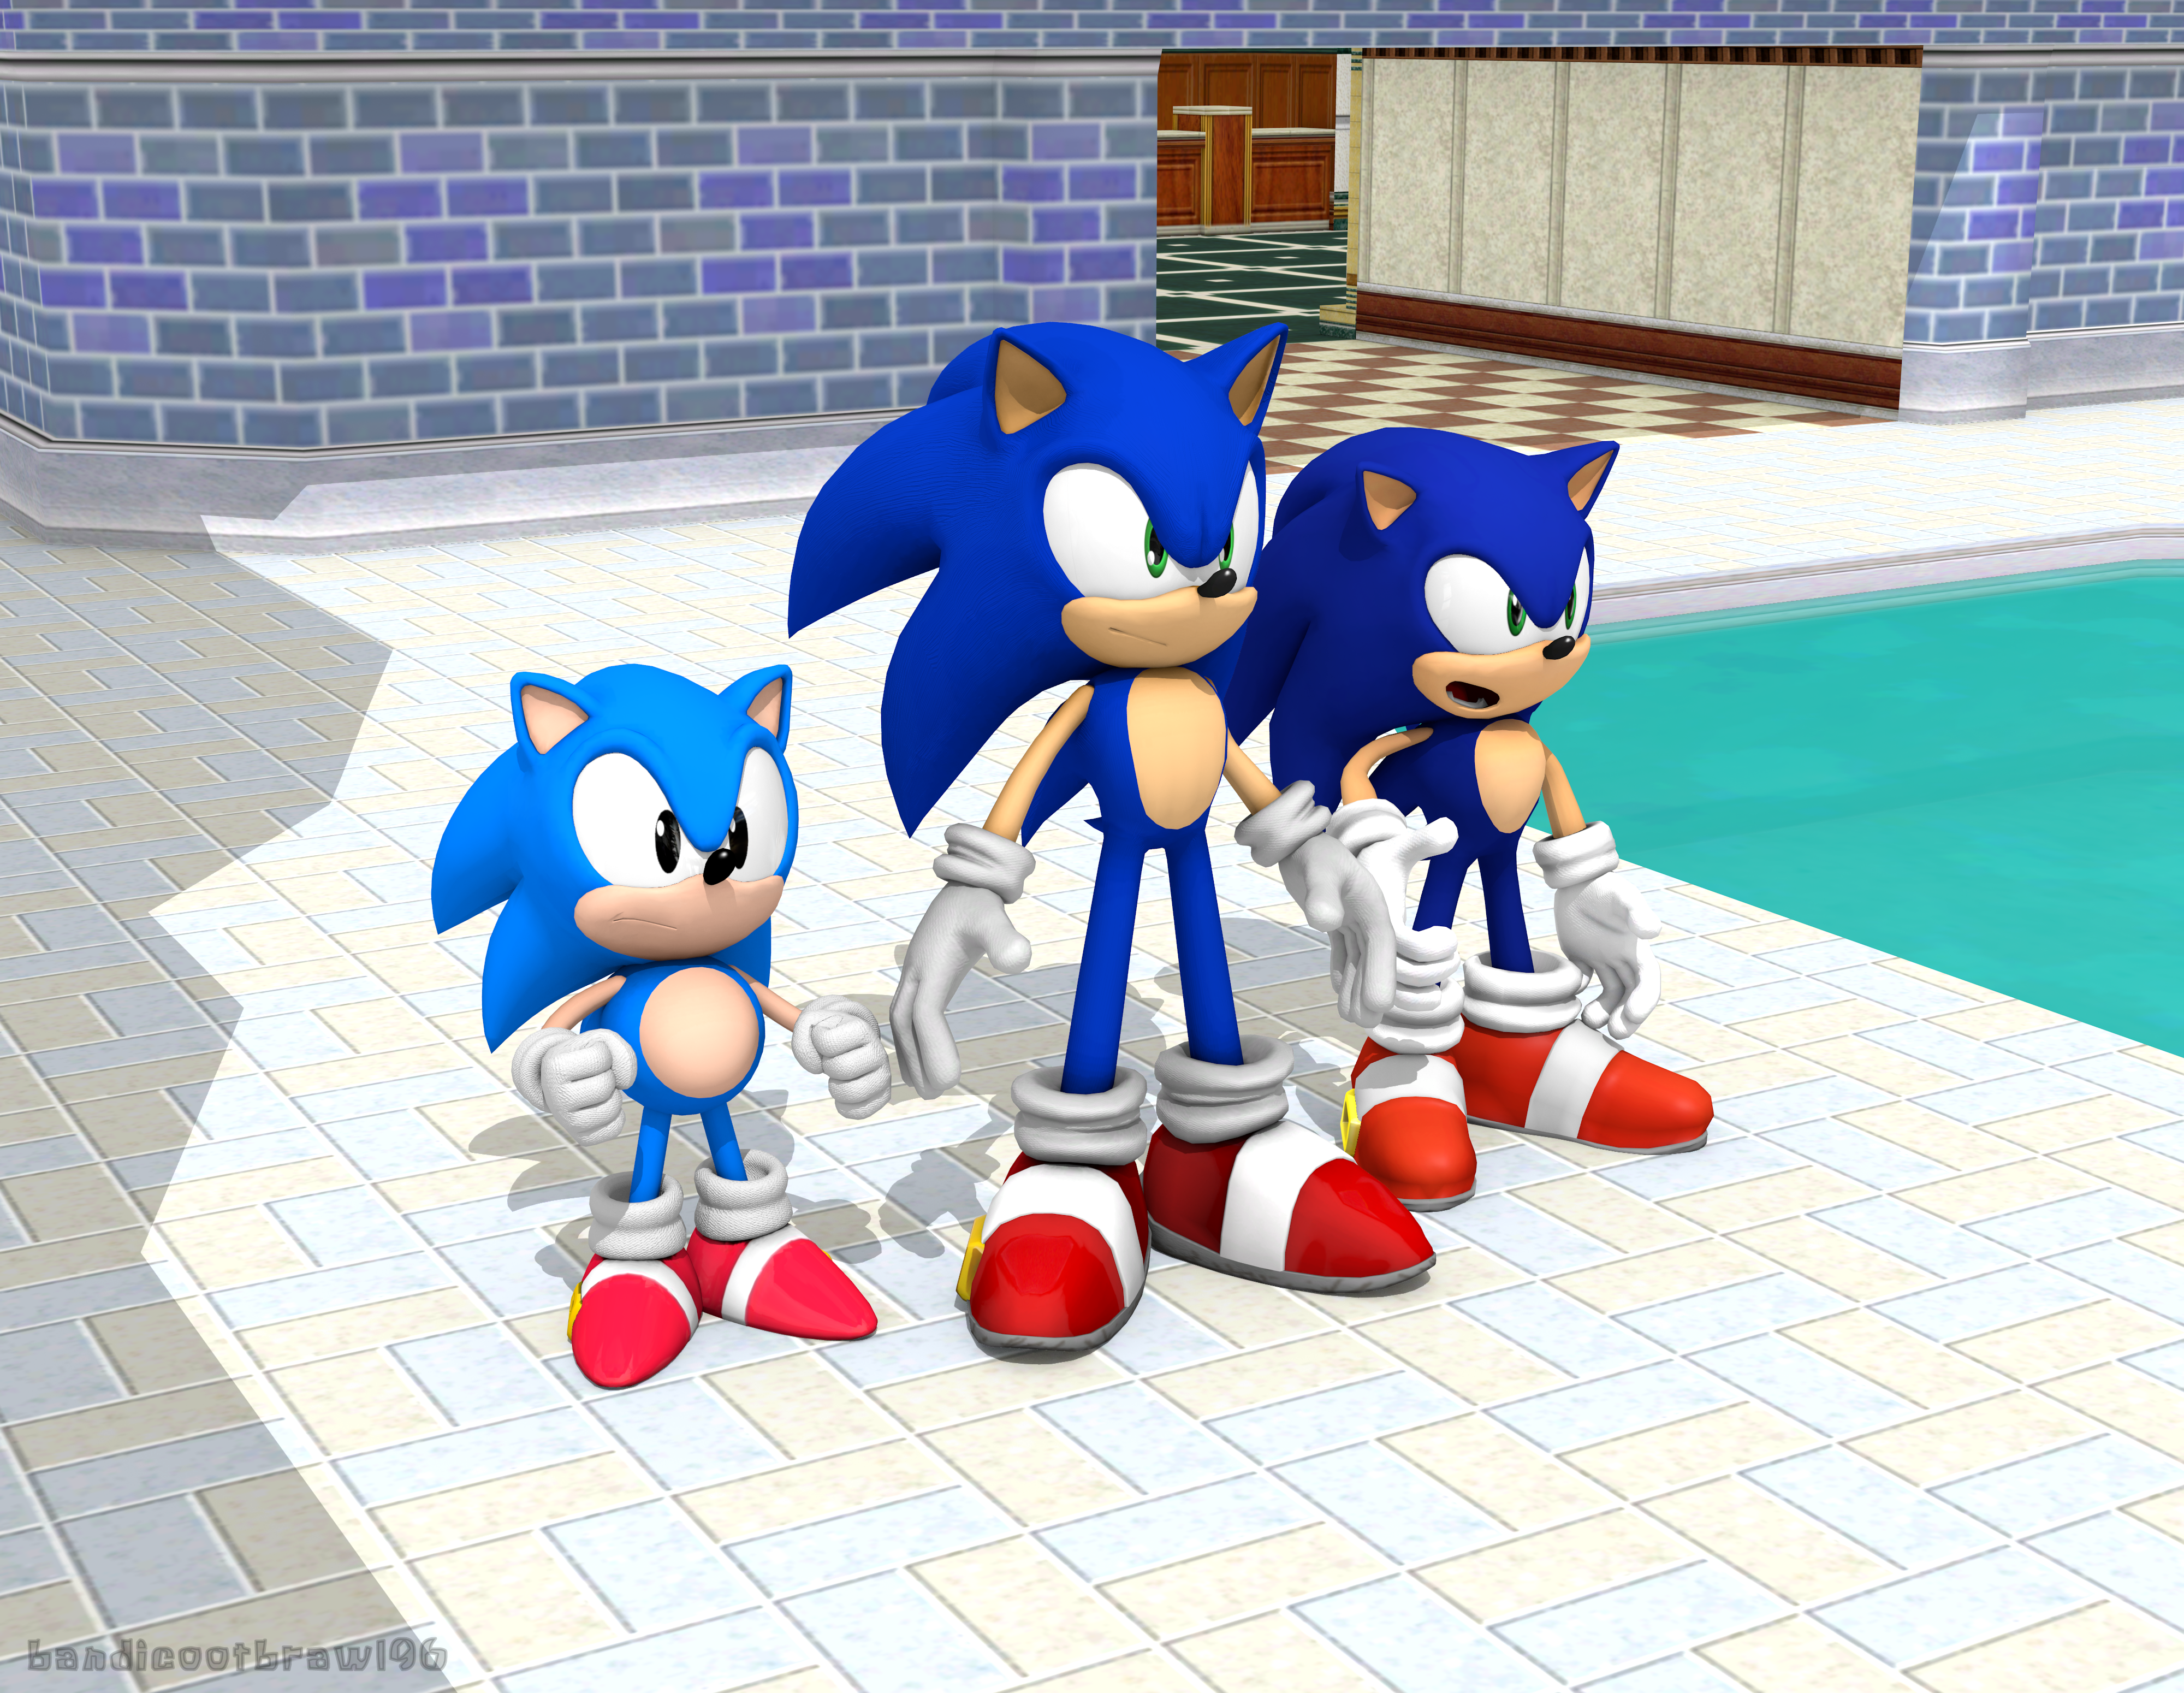 Classic Sonic Fanart by Dude1009 on Newgrounds